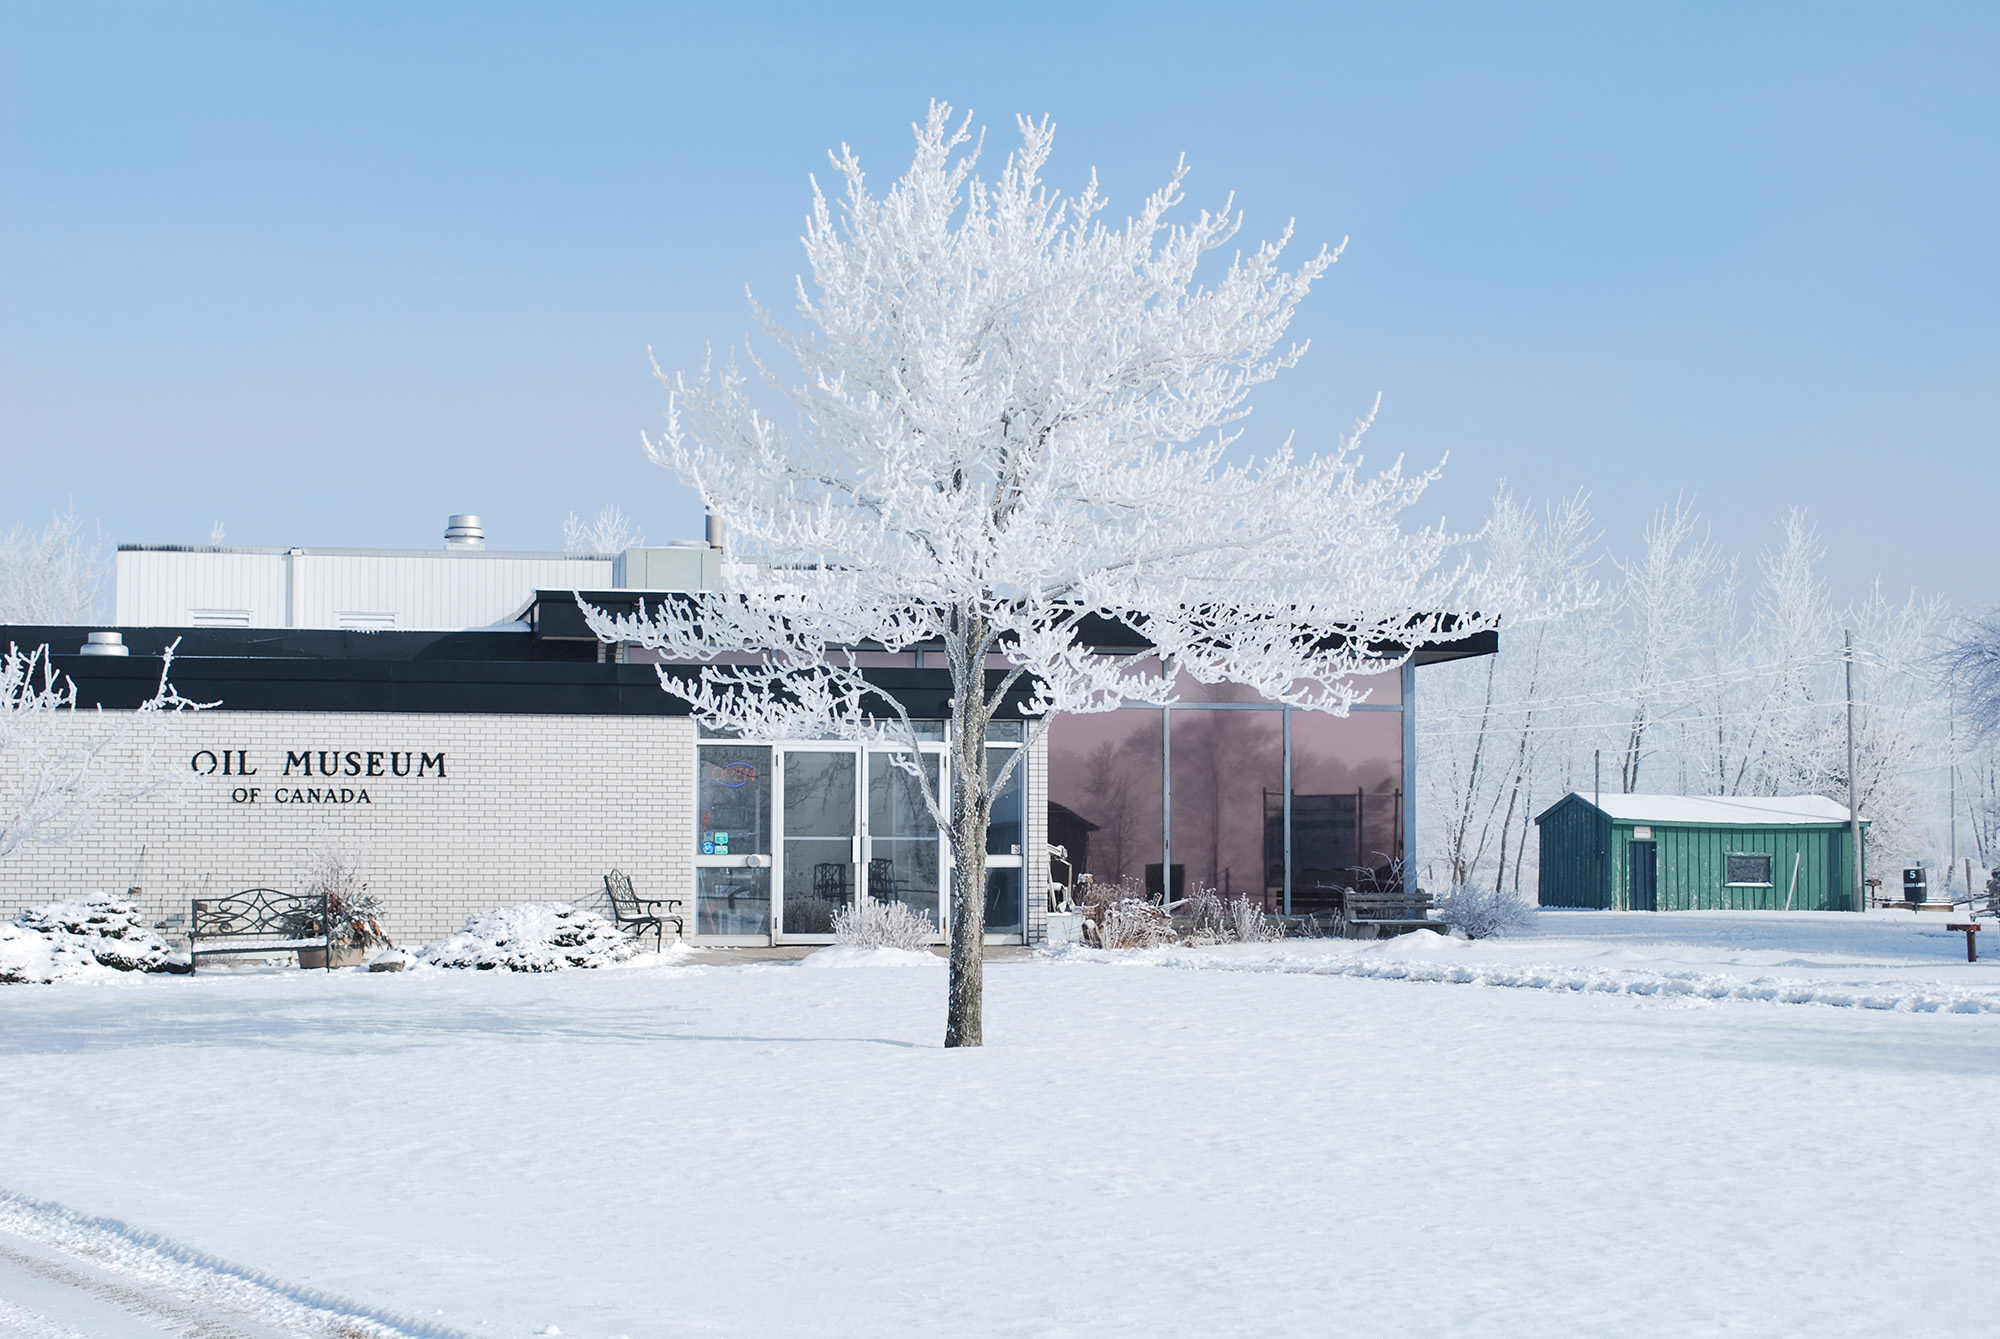 Snowy exterior at Oil Museum of Canada, National Historic Site